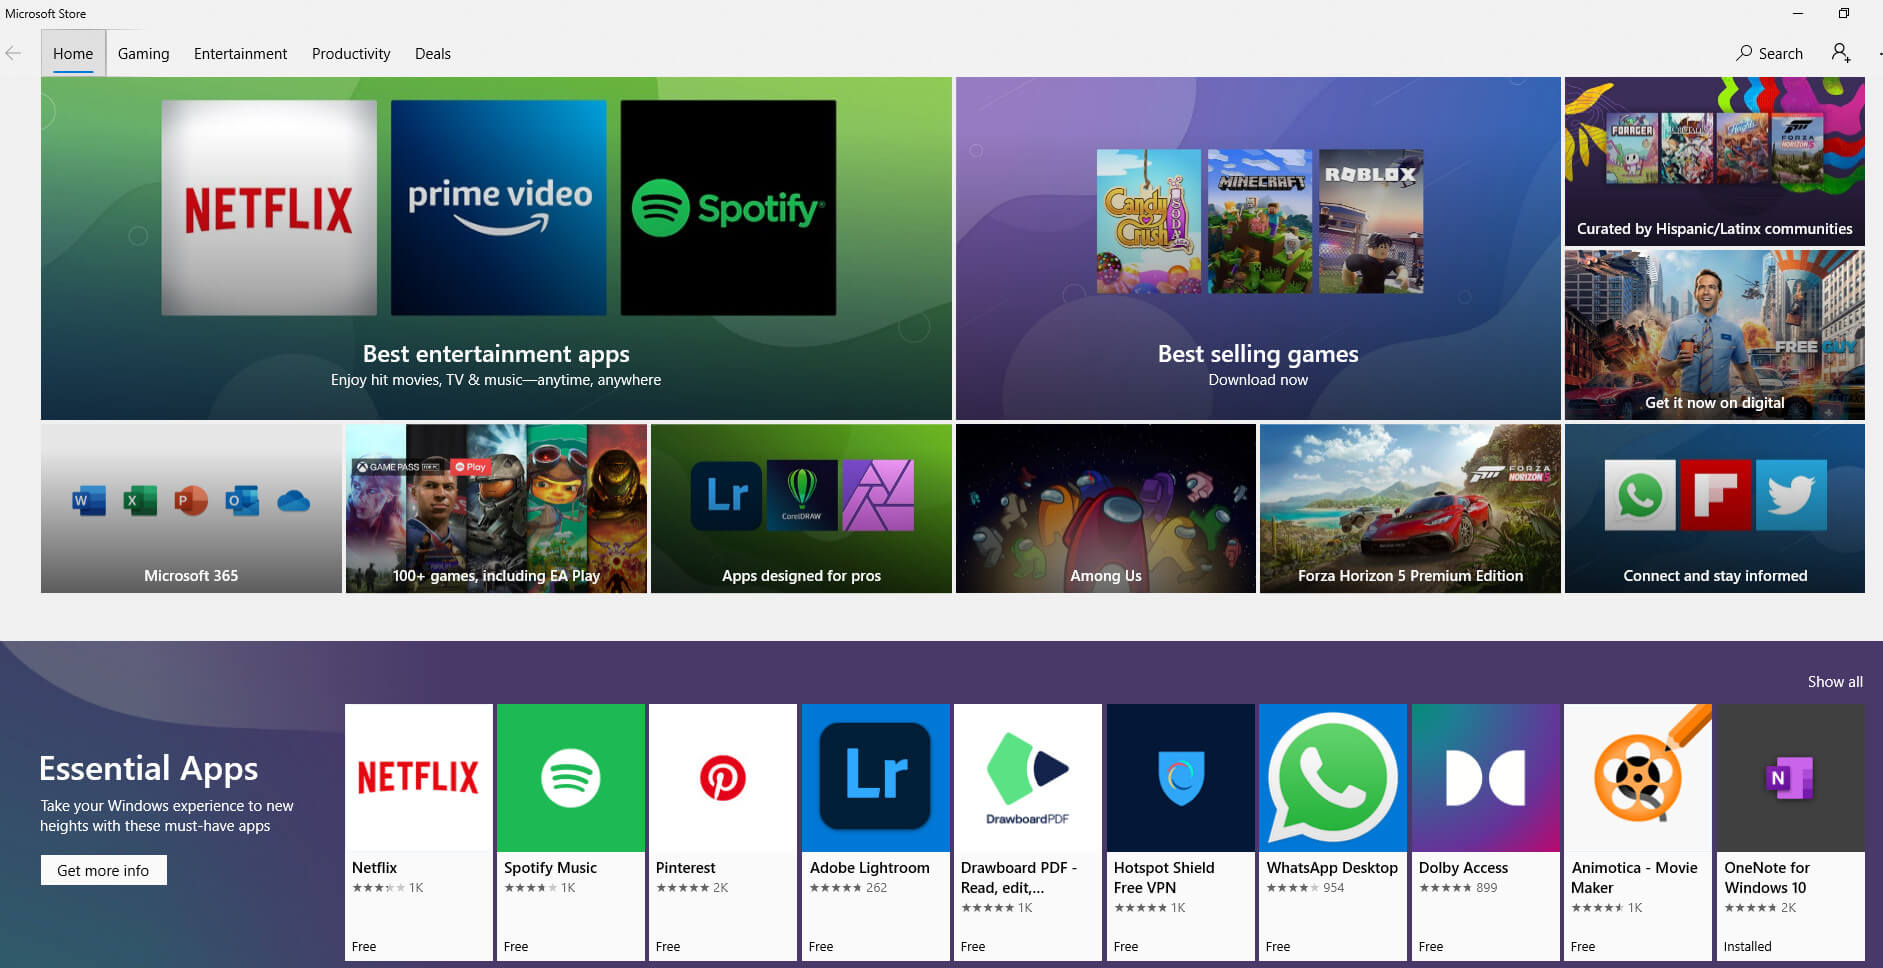 Microsoft Store Support for third-party Apps